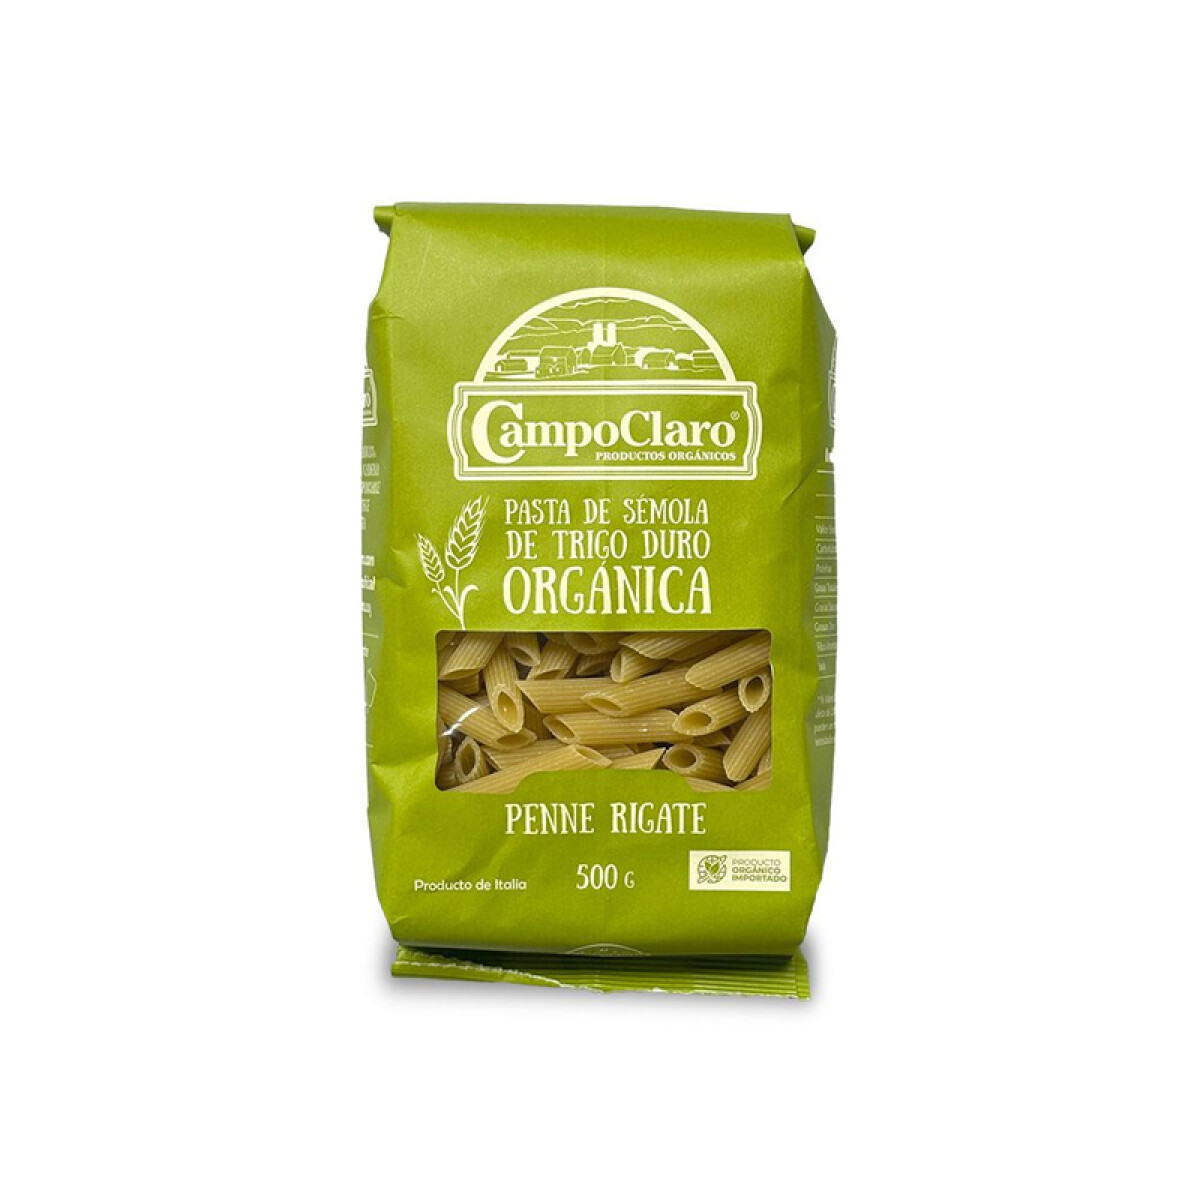 PENNE RIGATE CAMPOCLARO 500GRS 